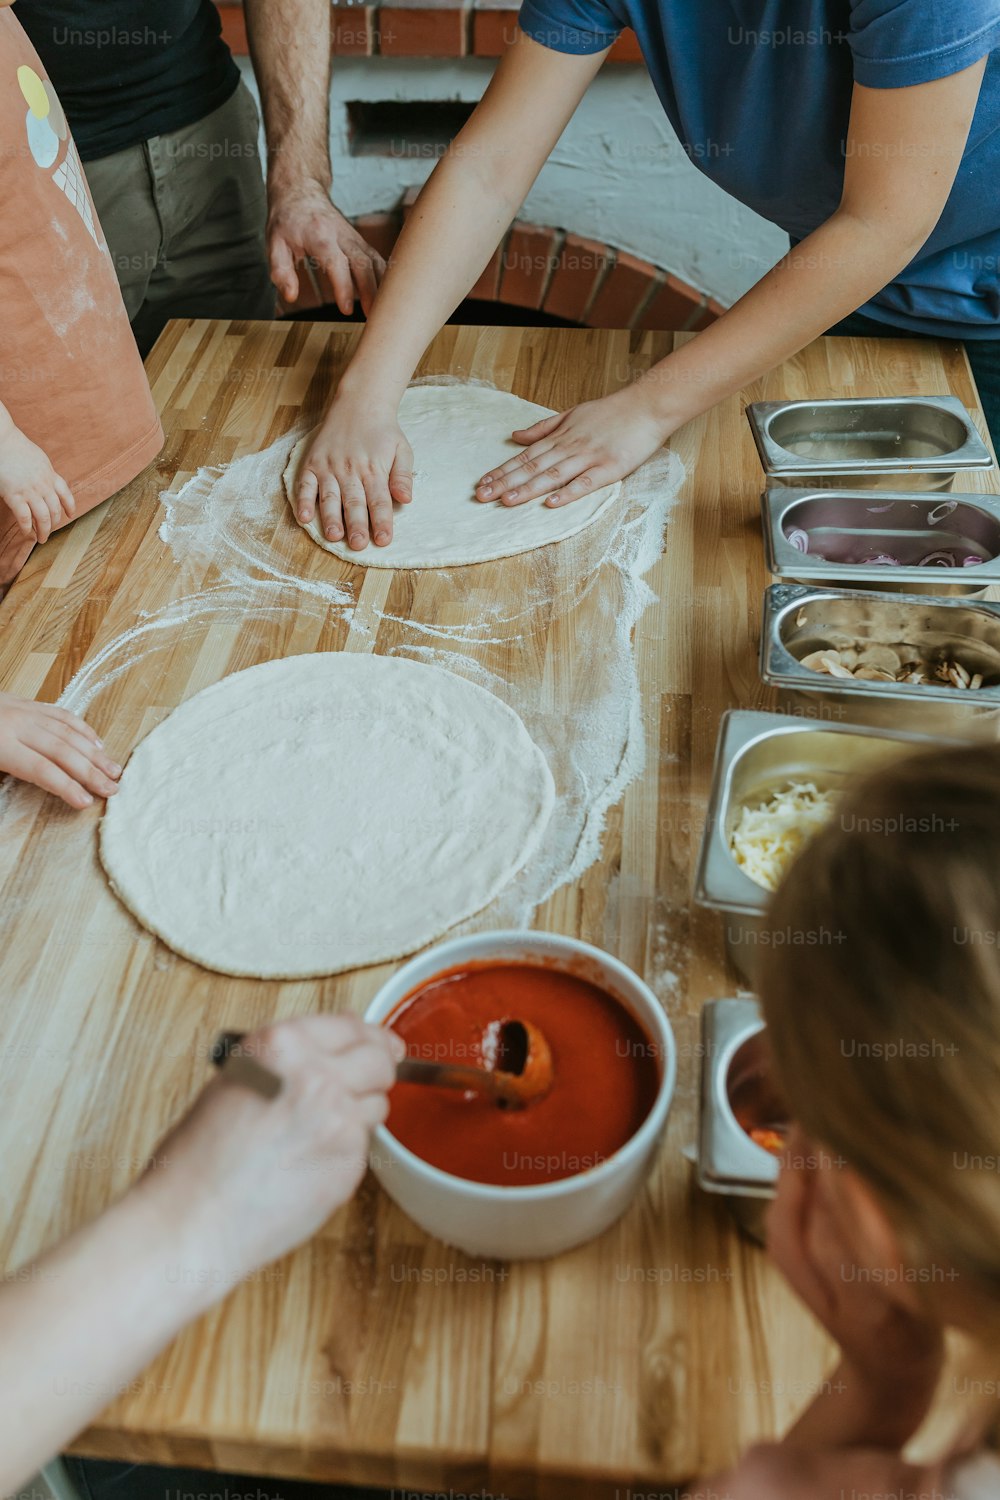 a group of people making pizza dough on a wooden table